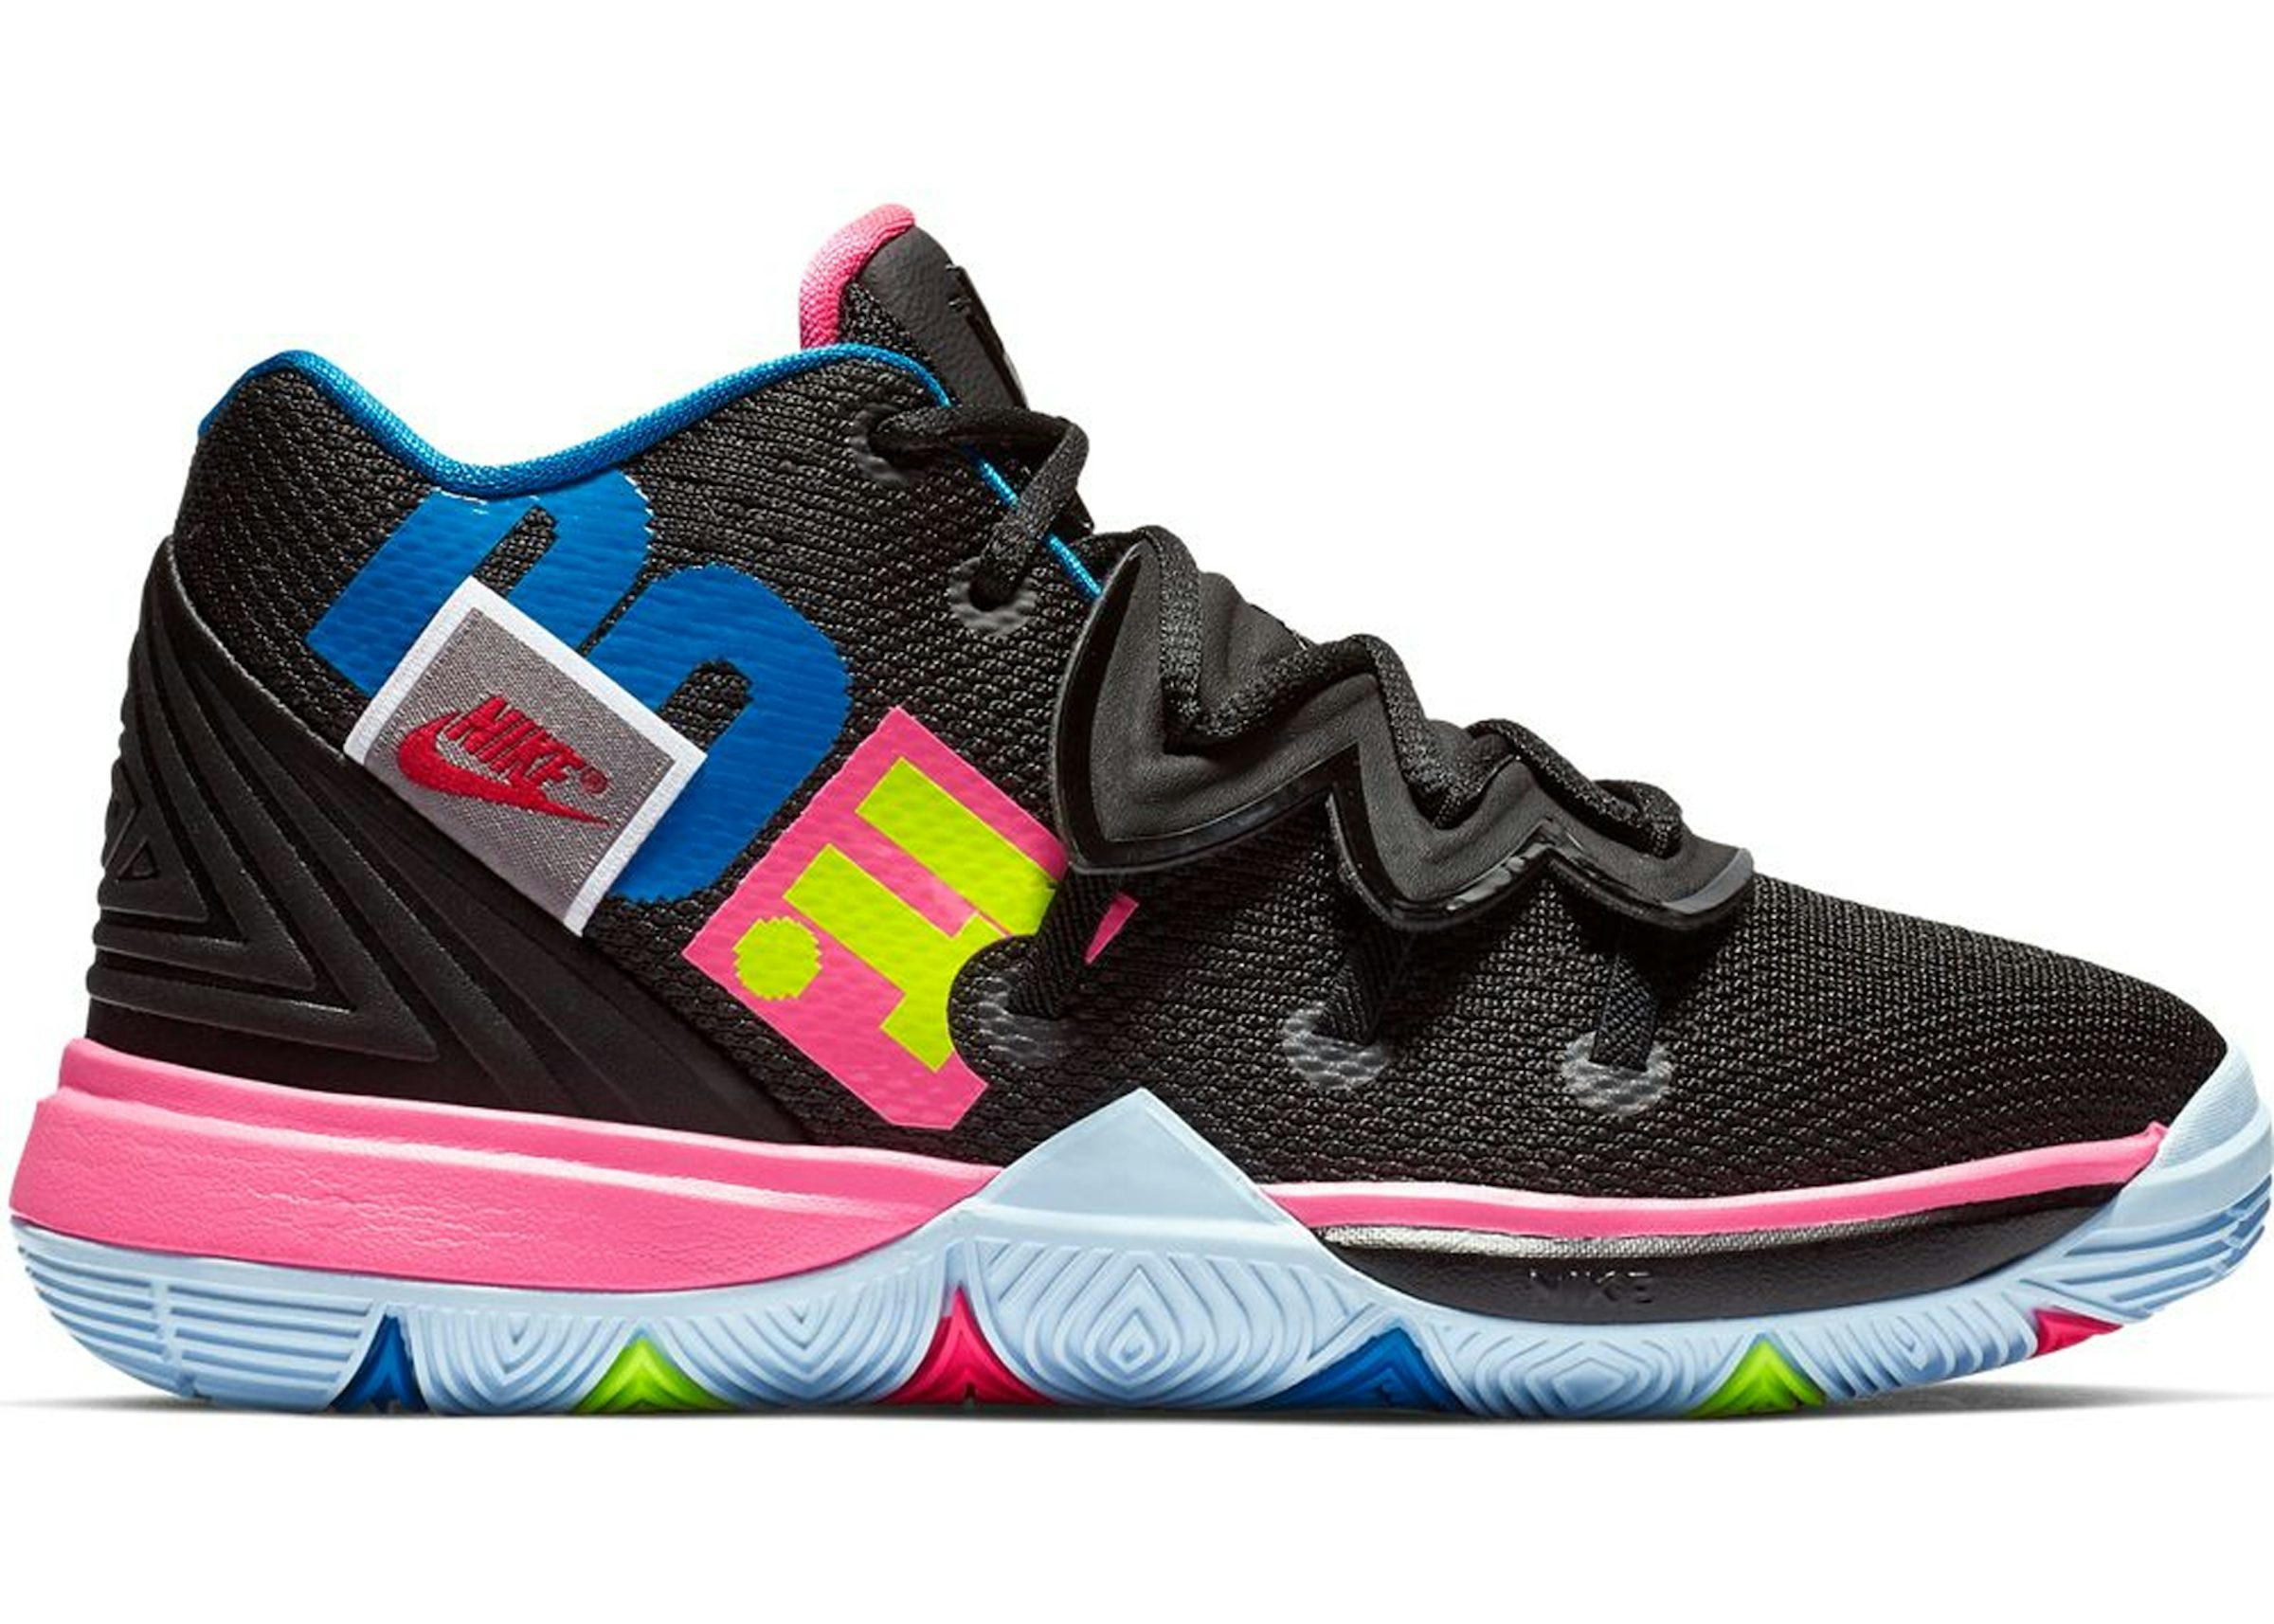 Nike Kyrie 5 Just Do It (Ps) Kids' - Aq2458-003 - Us